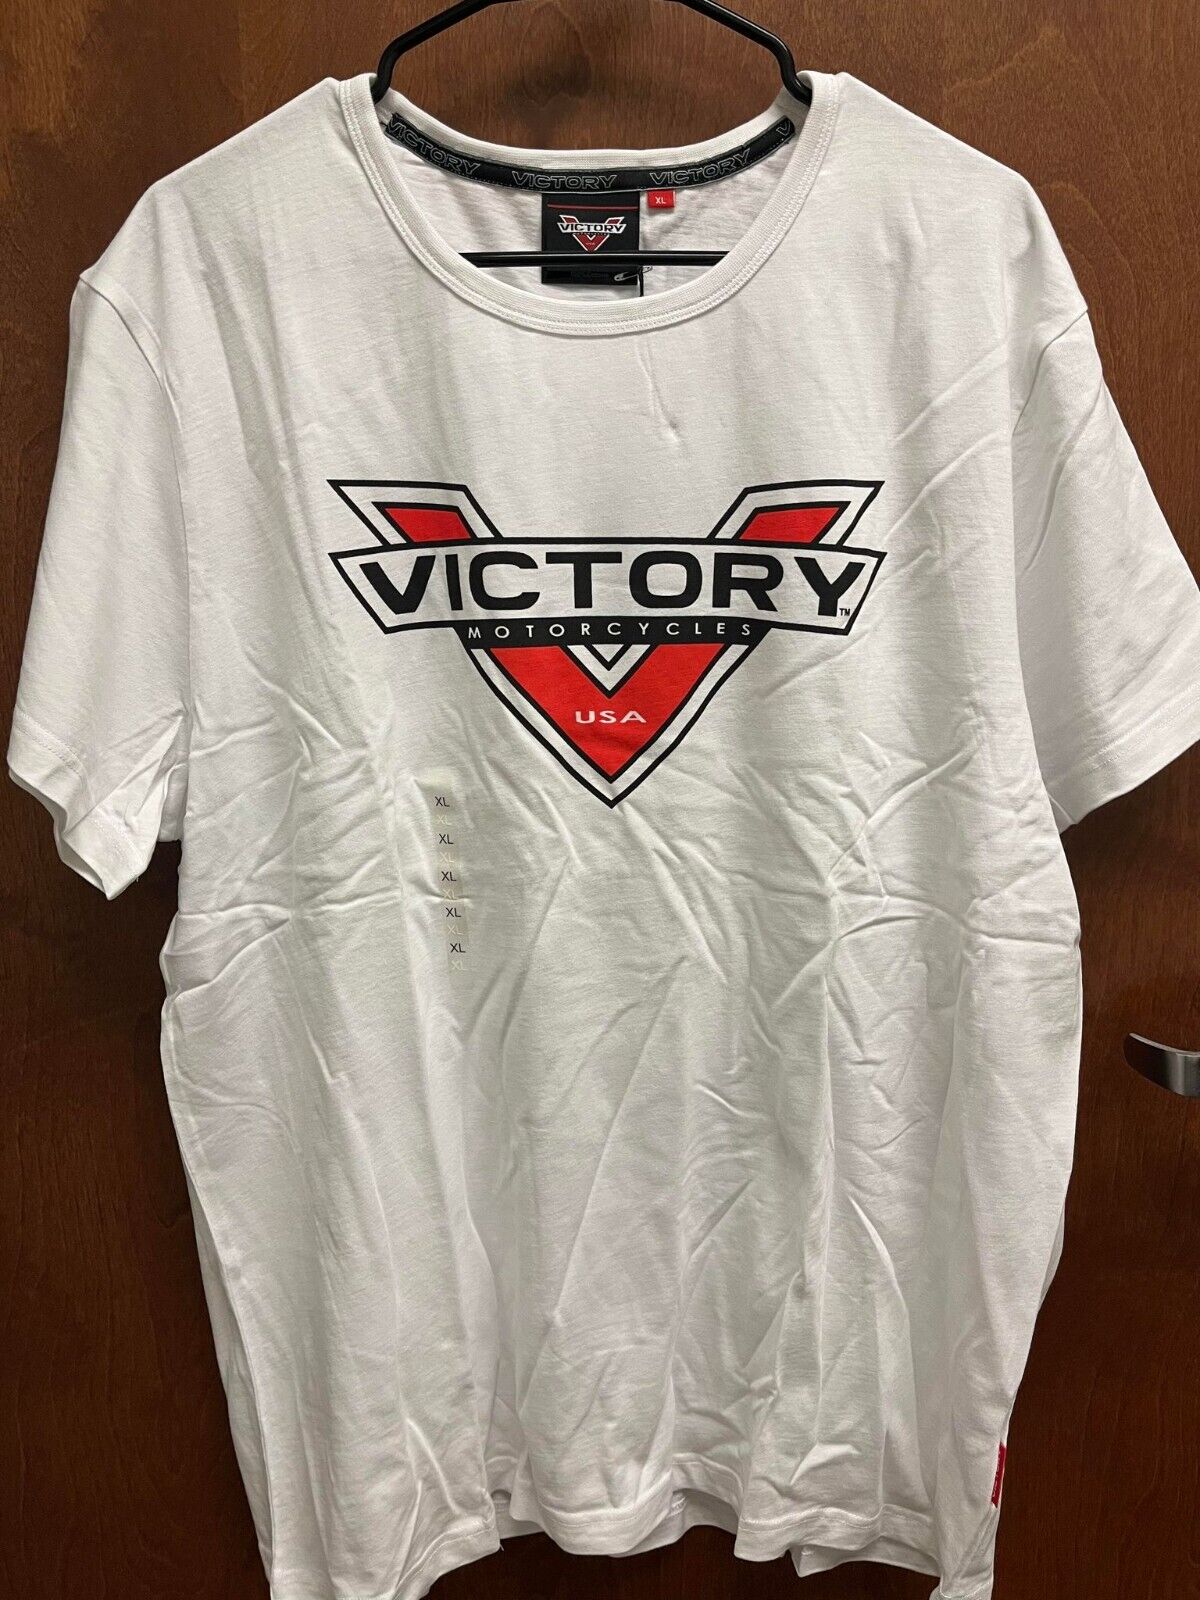 New Victory American Motorcycle Logo Men's Cotton T-Shirt Size S-3XL Buy 3 Get 1